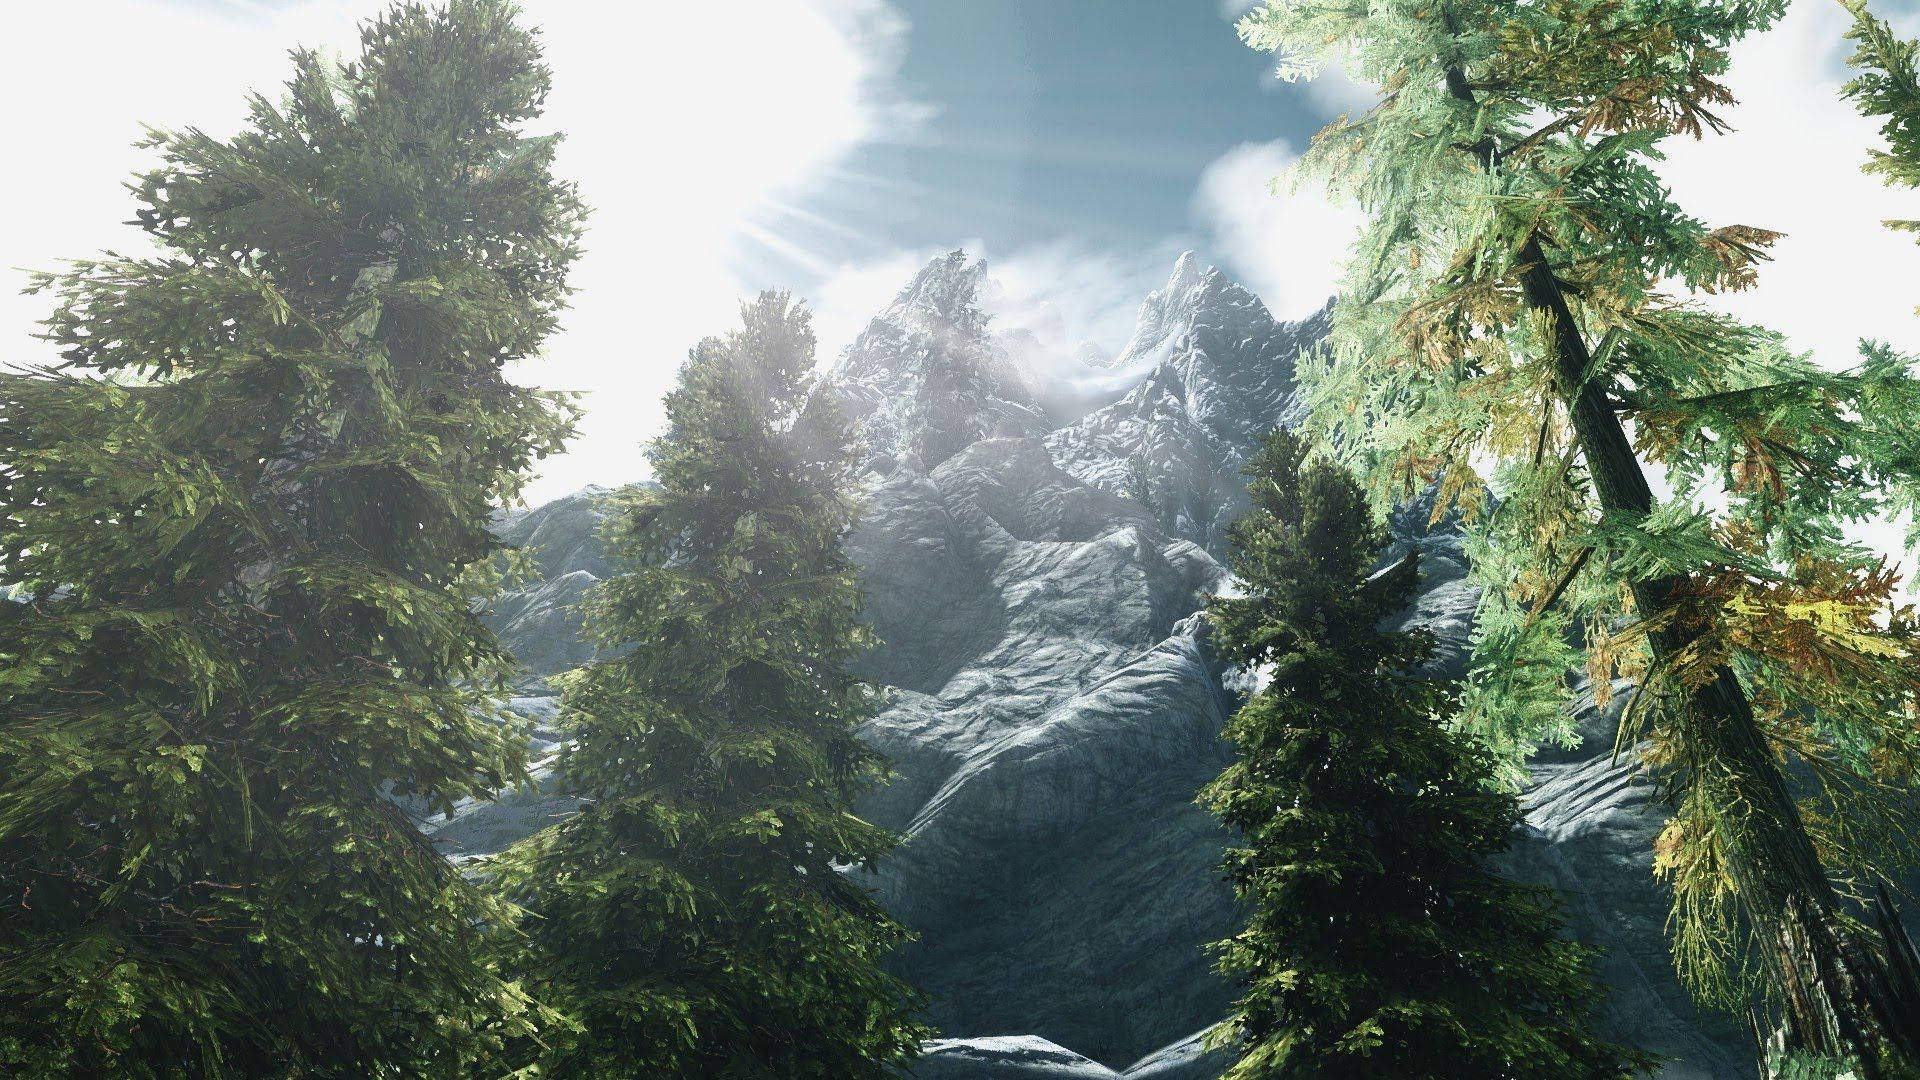 Explore the magical world of Skyrim in Ultra HD! Wallpaper